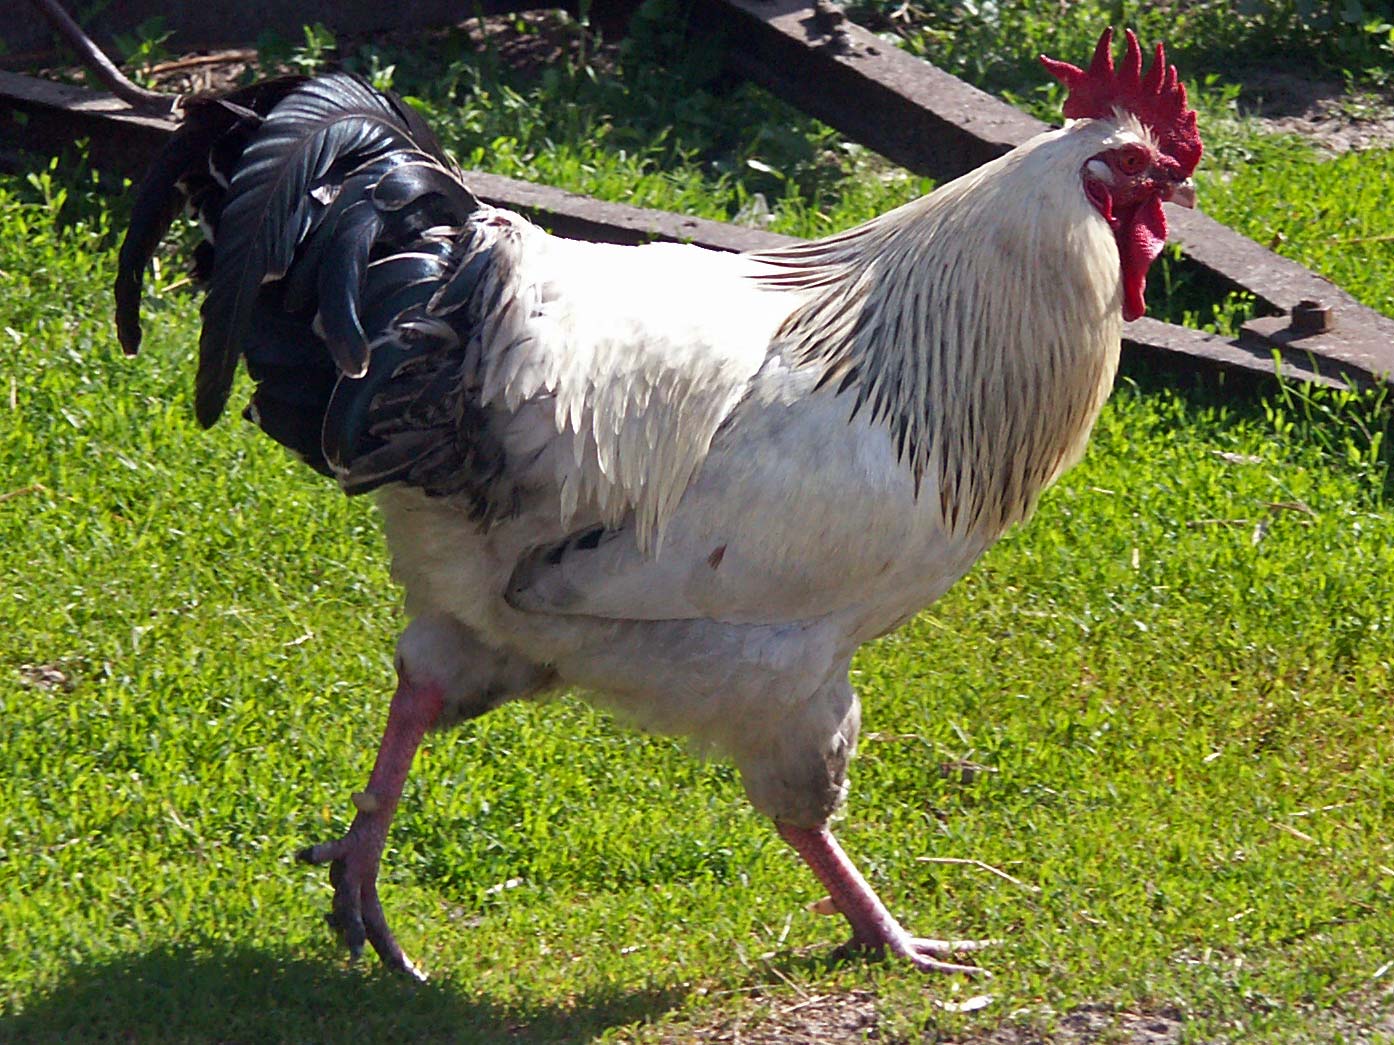 File:Rooster 1 AB.jpg - Wikimedia Commons